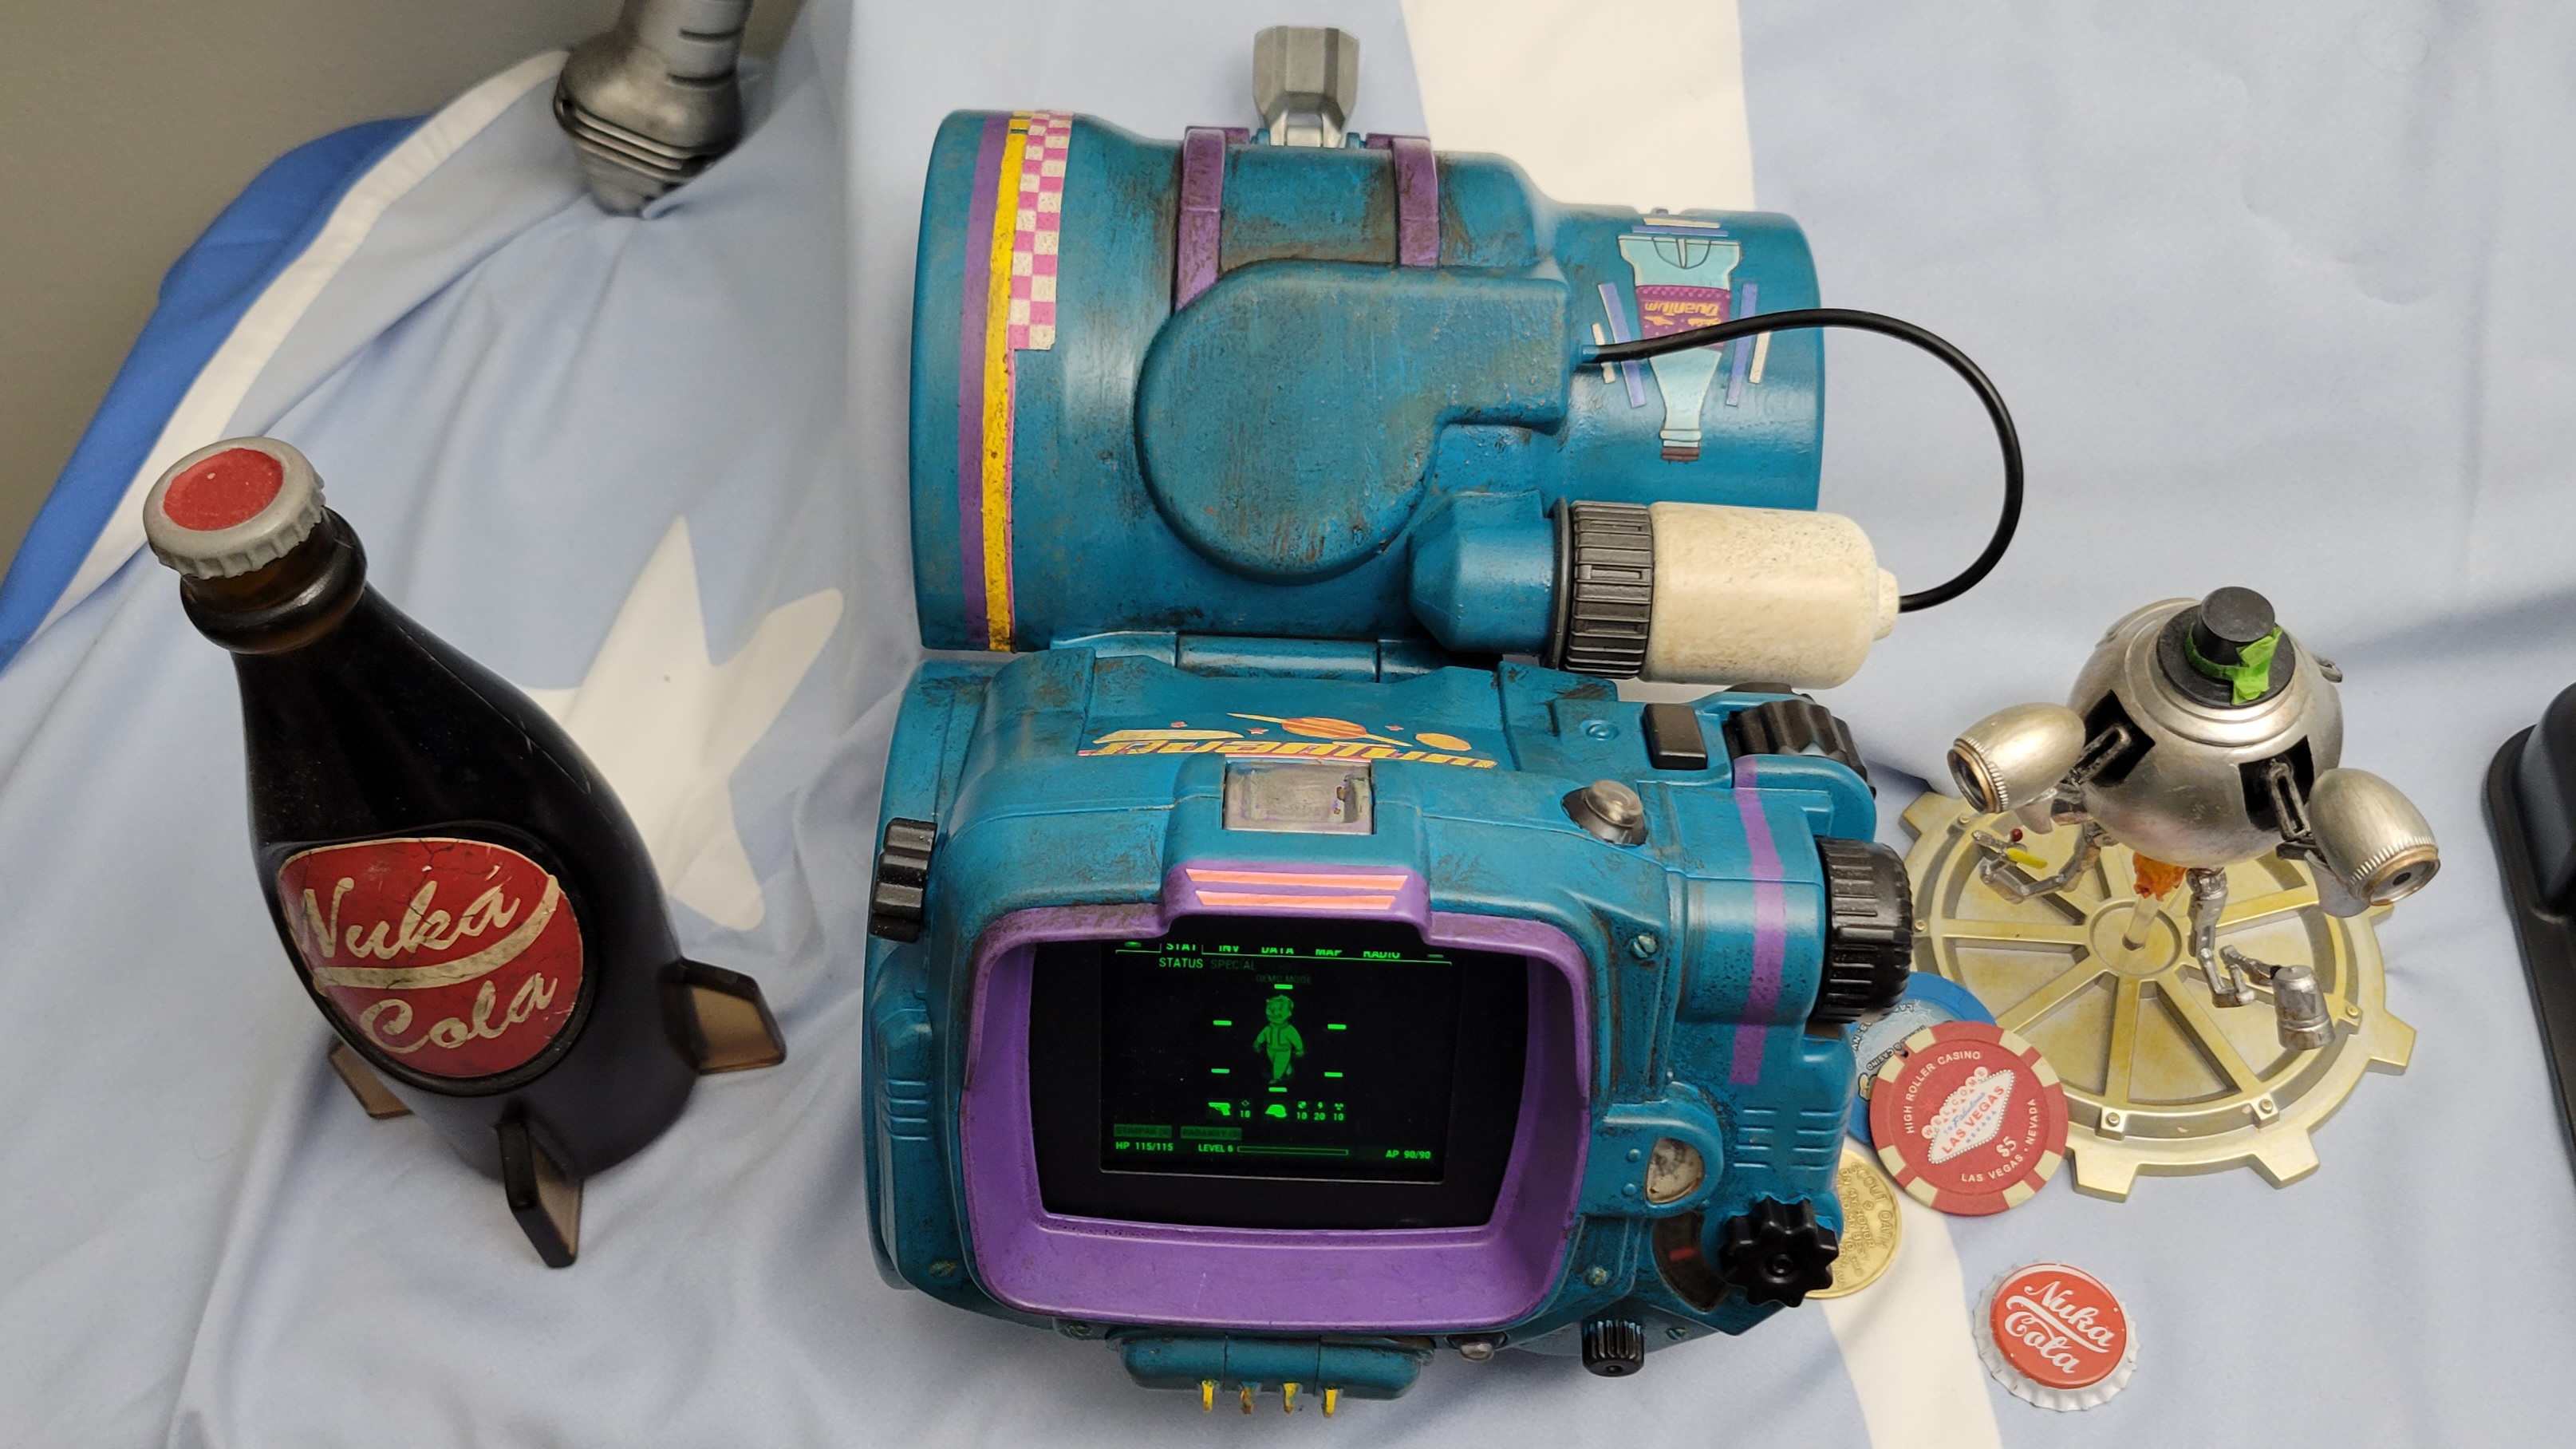 FALLOUT Pip Boy 2000 mk VI - Mod + Repaint - Punished Props Academy